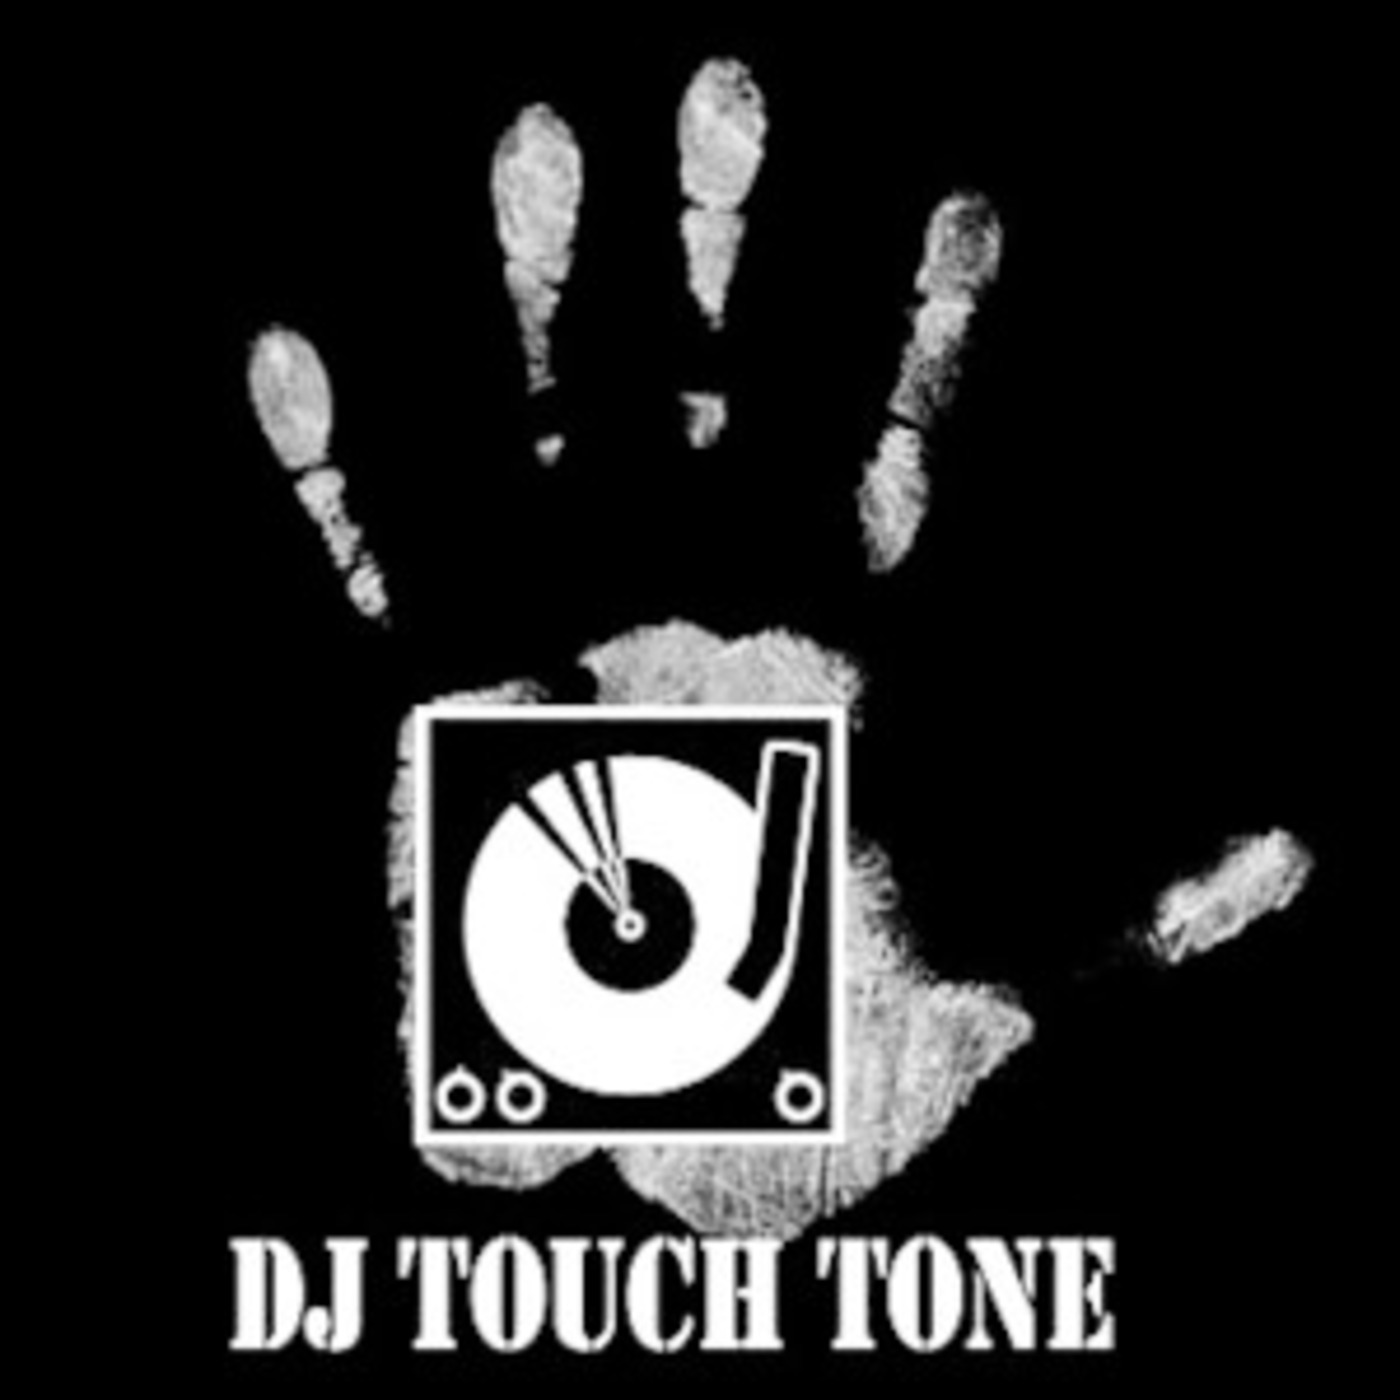 GOT A LOT TO DO - DJ TOUCH TONE & FLU THE GREAT